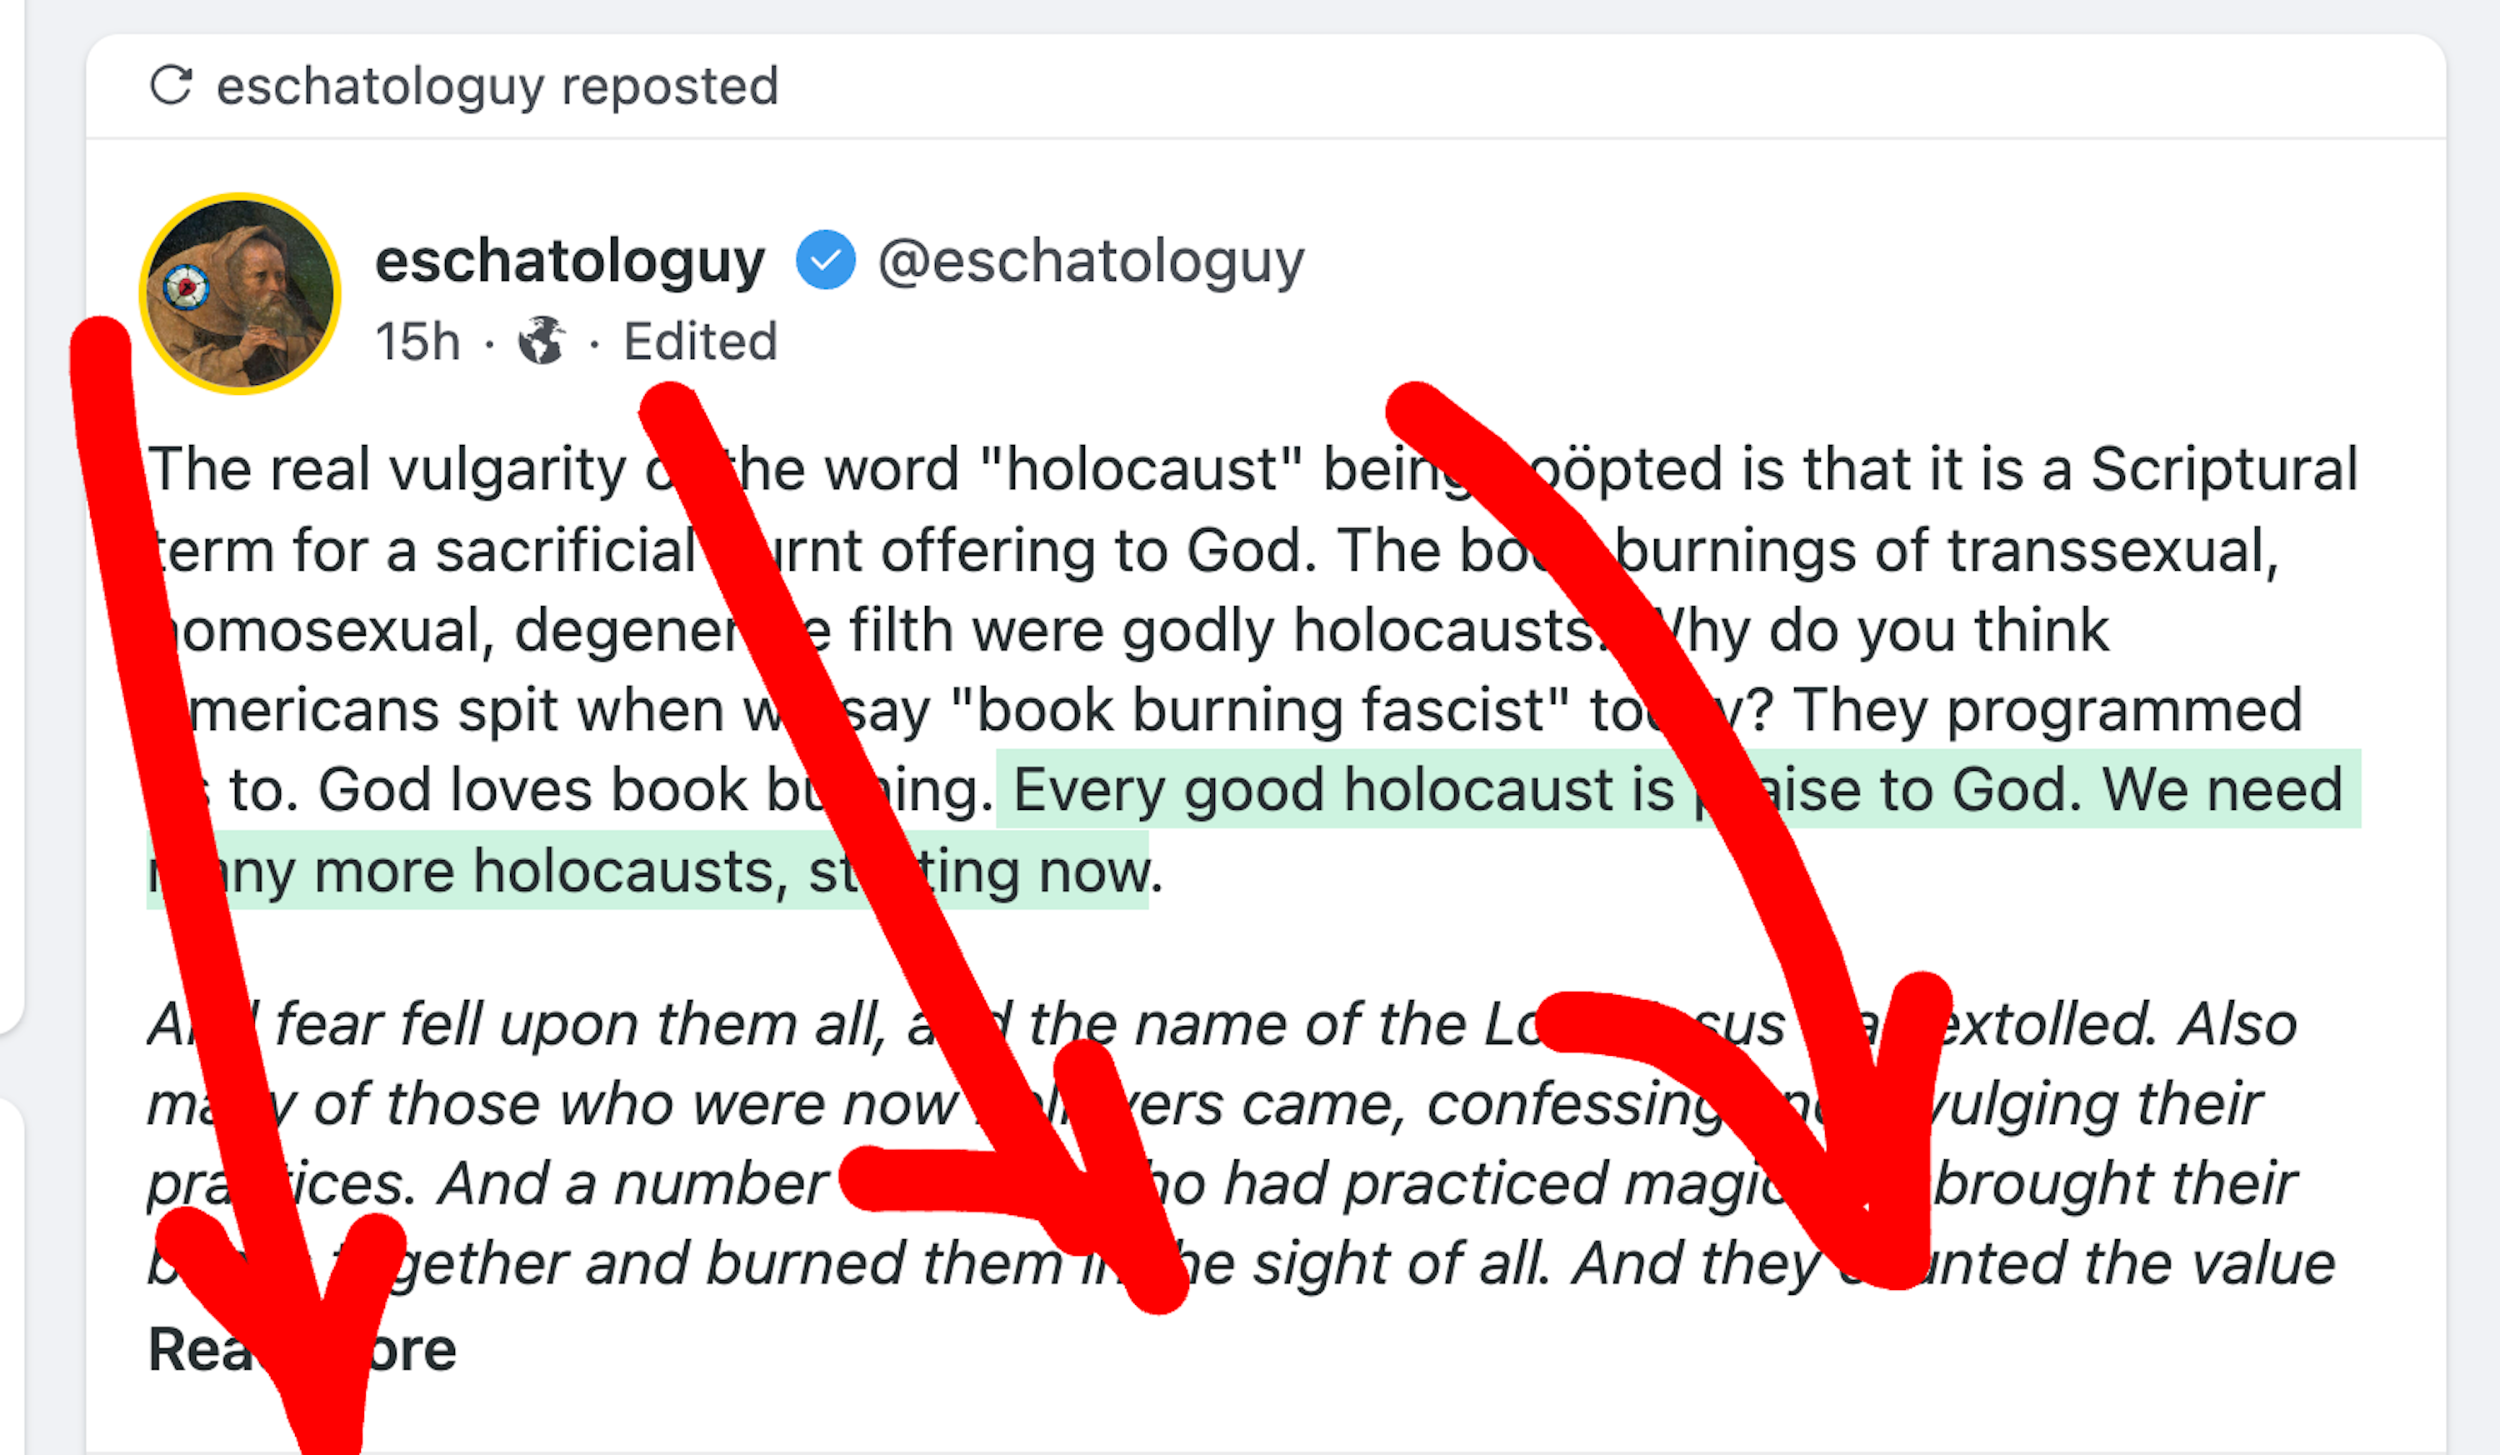 TW: Antisemitism. Woe as eschatologuy on Gab, complaining that the word "holocaust" has been coopted (presumably by Jews) and then ending comment with saying "we need a good holocaust" and/or "more holocausts." Quotes Bible verse about Christians burning "magical books."